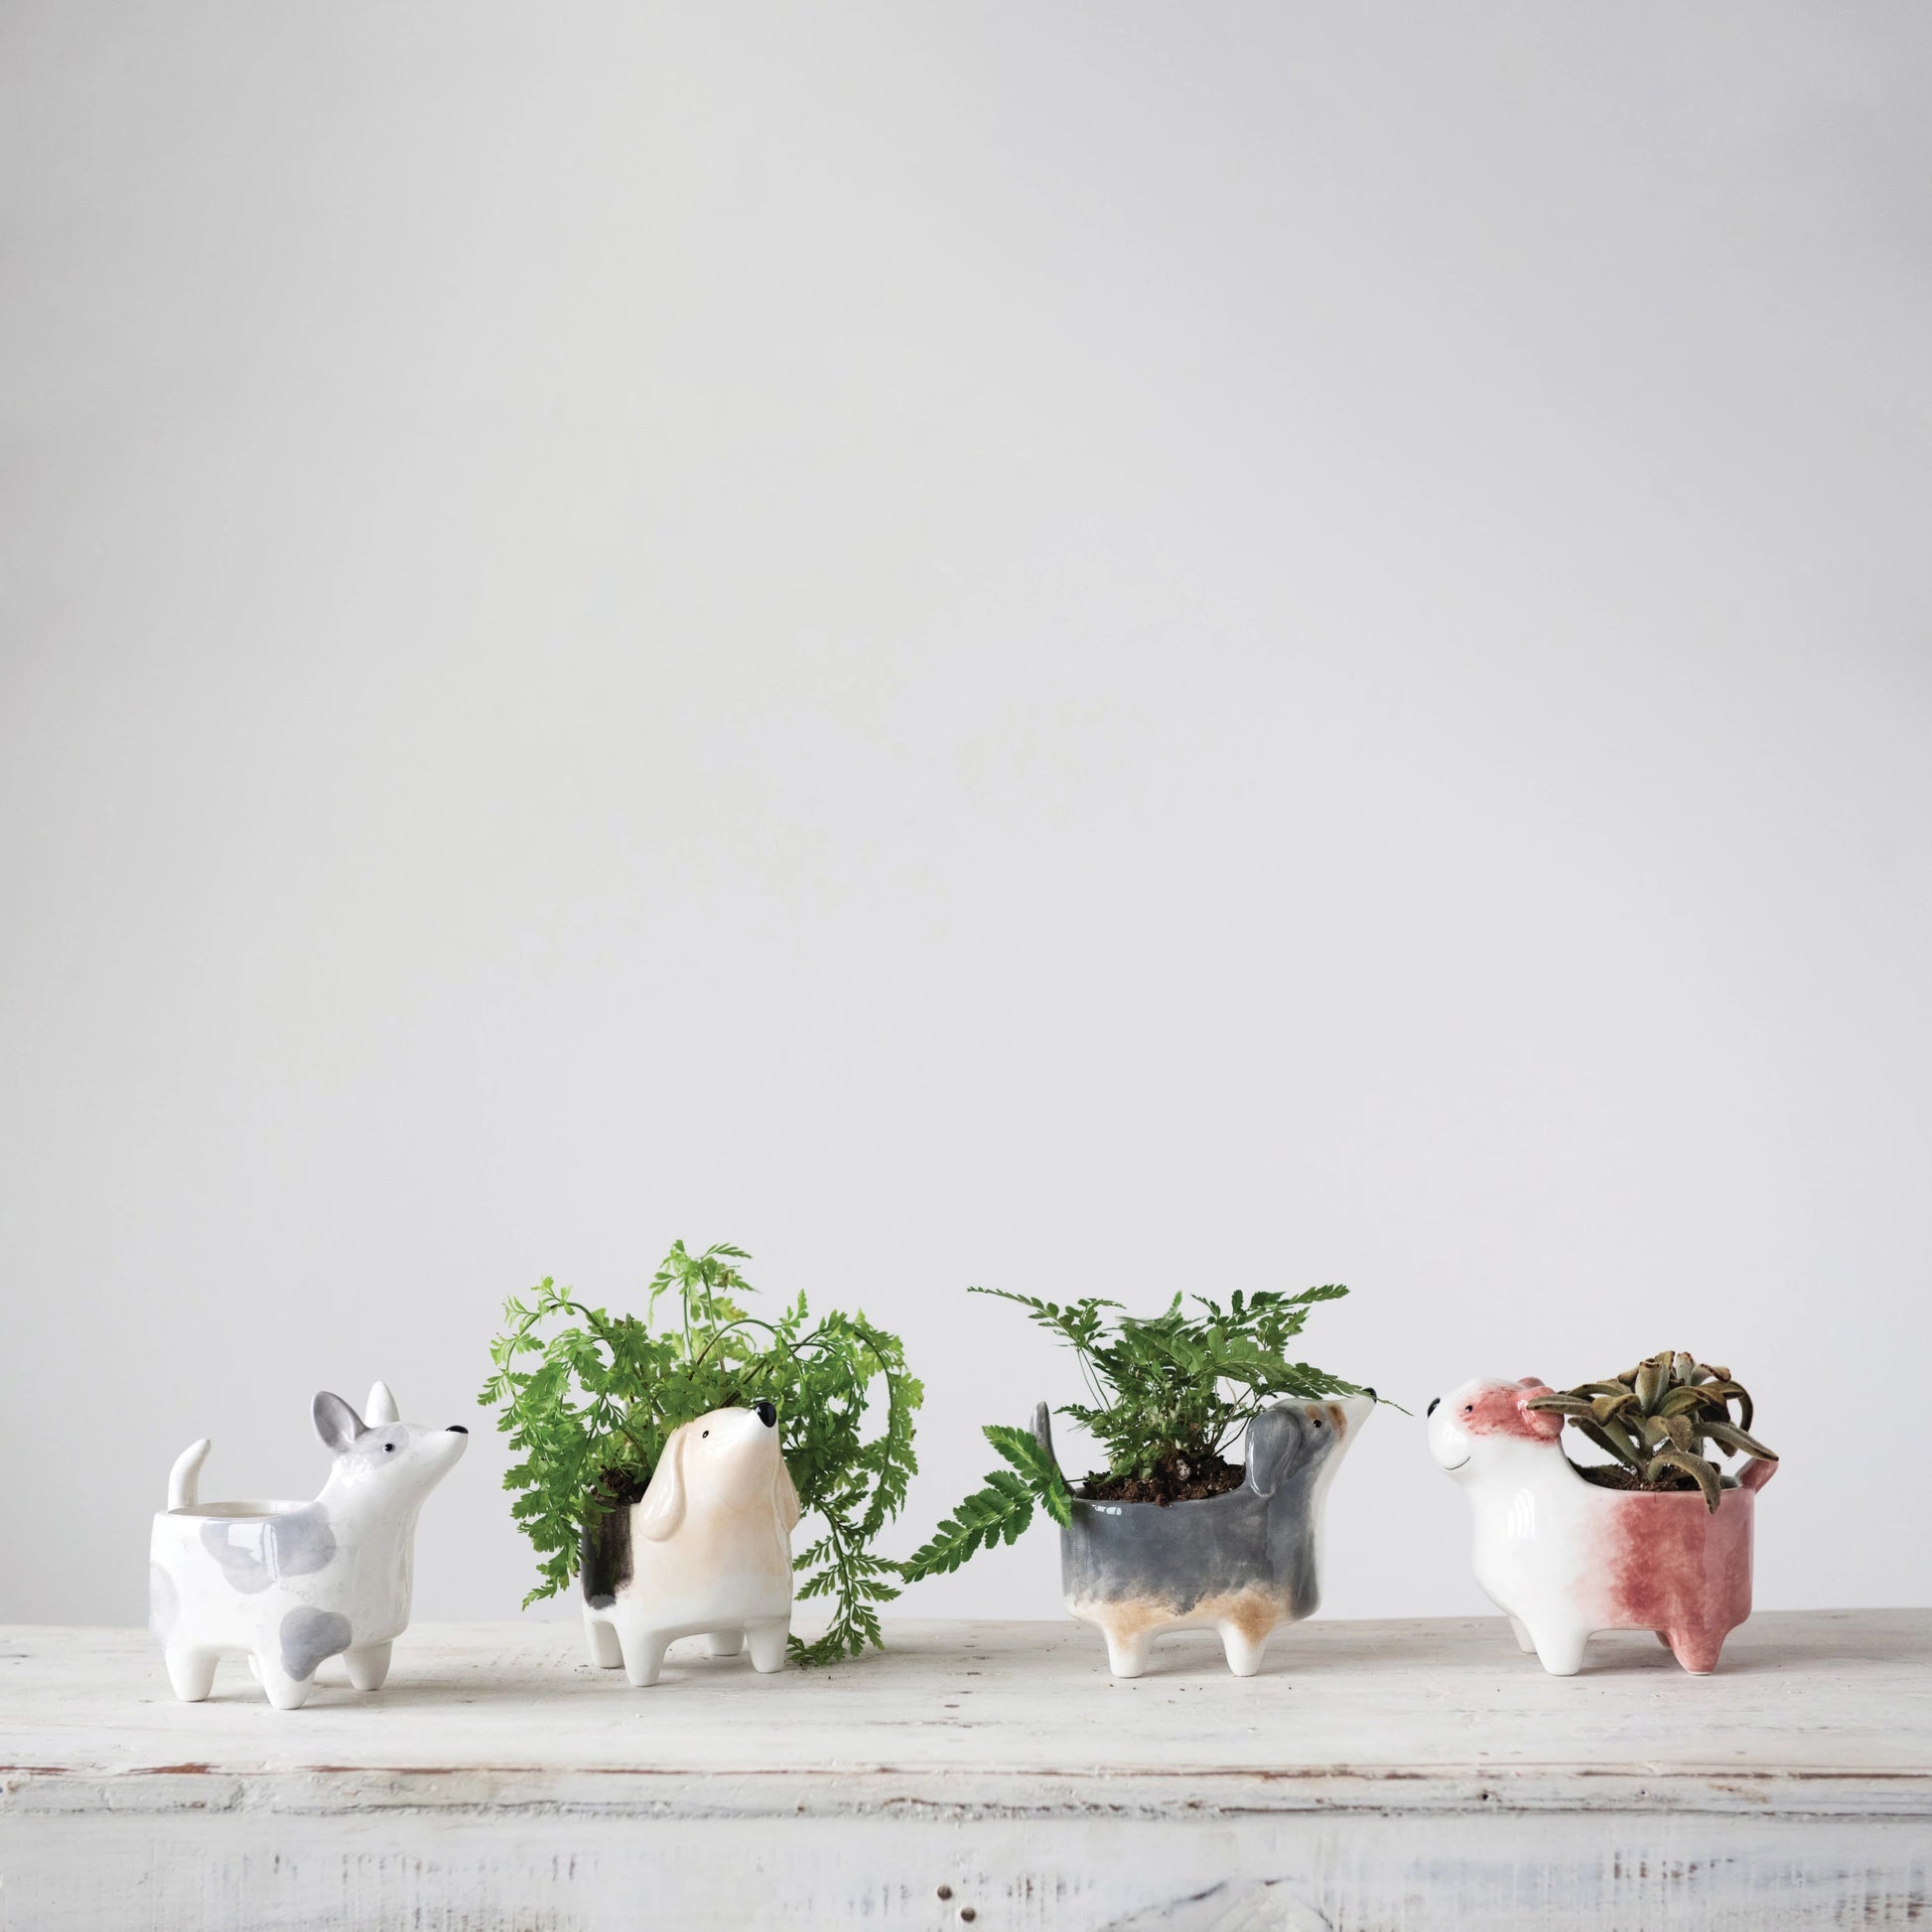 4 styles of dog planters, 3 have plantes in them, in a row on a white wooden table.